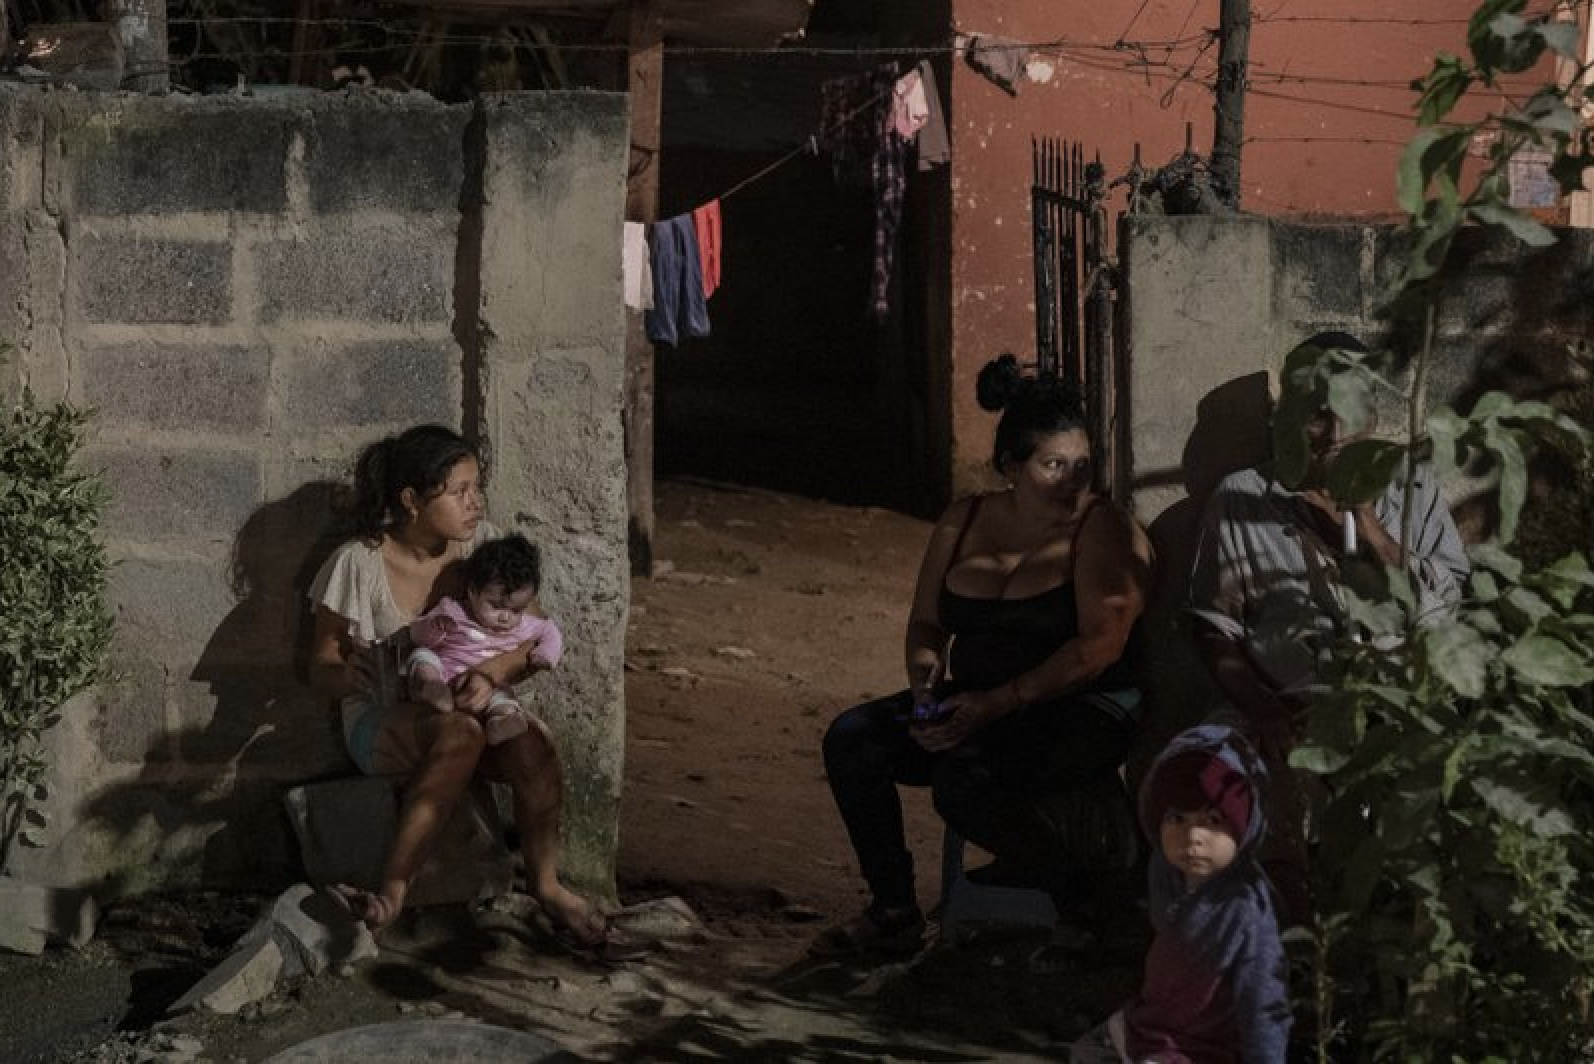 A family sits outside their home as forensic workers investigate a body at a crime scene in the Rivera Hernandez neighborhood of San Pedro Sula, Honduras on Nov. 30, 2019. MS-13. Mara 18. Los Vatos Locos _ The Crazy Guys. The gangs' shifting lines of control dodge and weave through Rivera Hernandez, a place where even the police are afraid. Image by Moises Castillo/ AP Photo. Honduras, 2019.